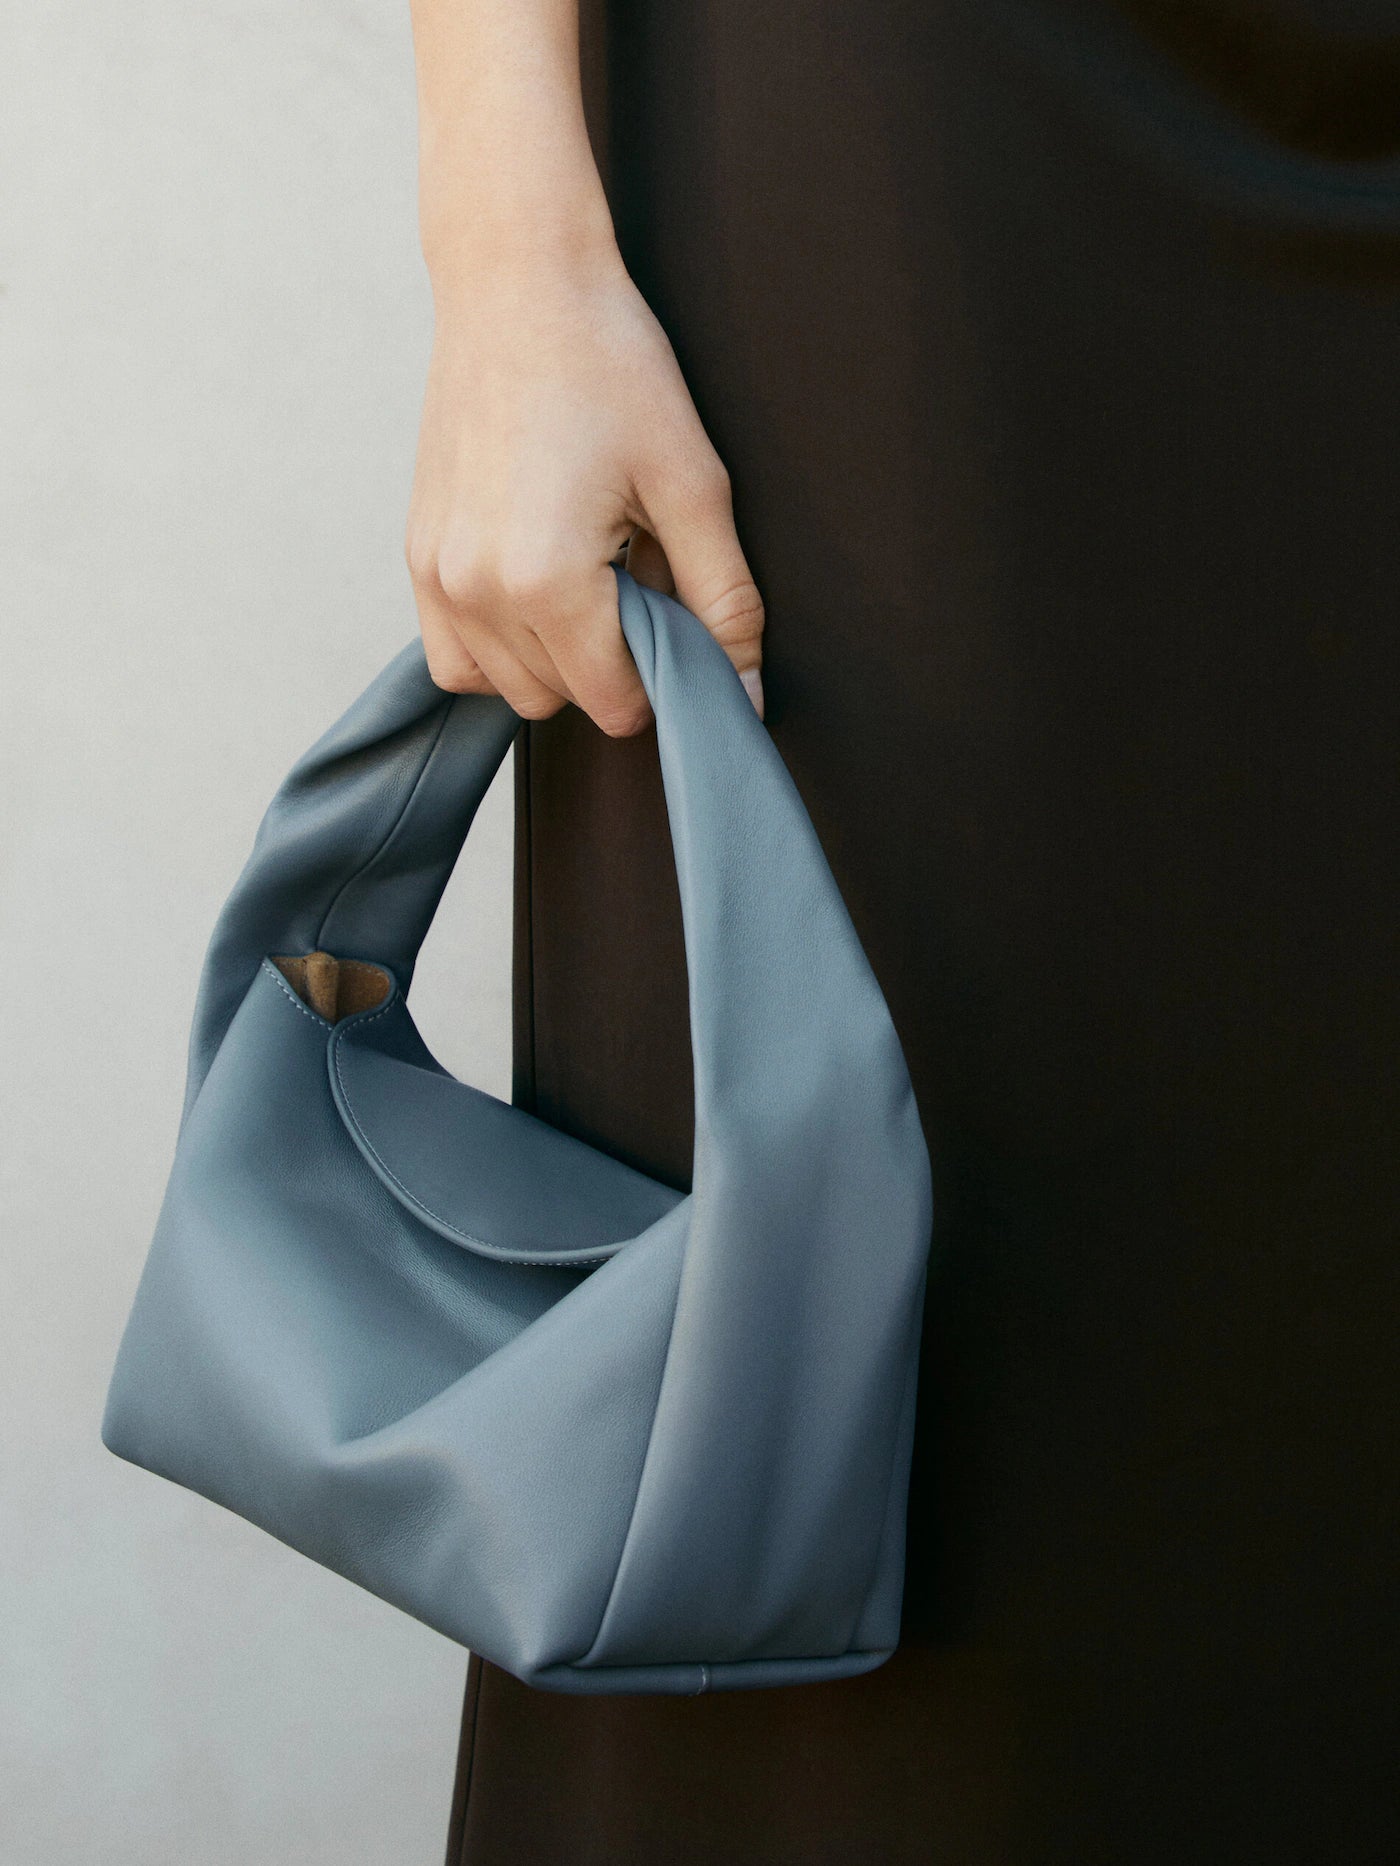 Nappa leather croissant bag